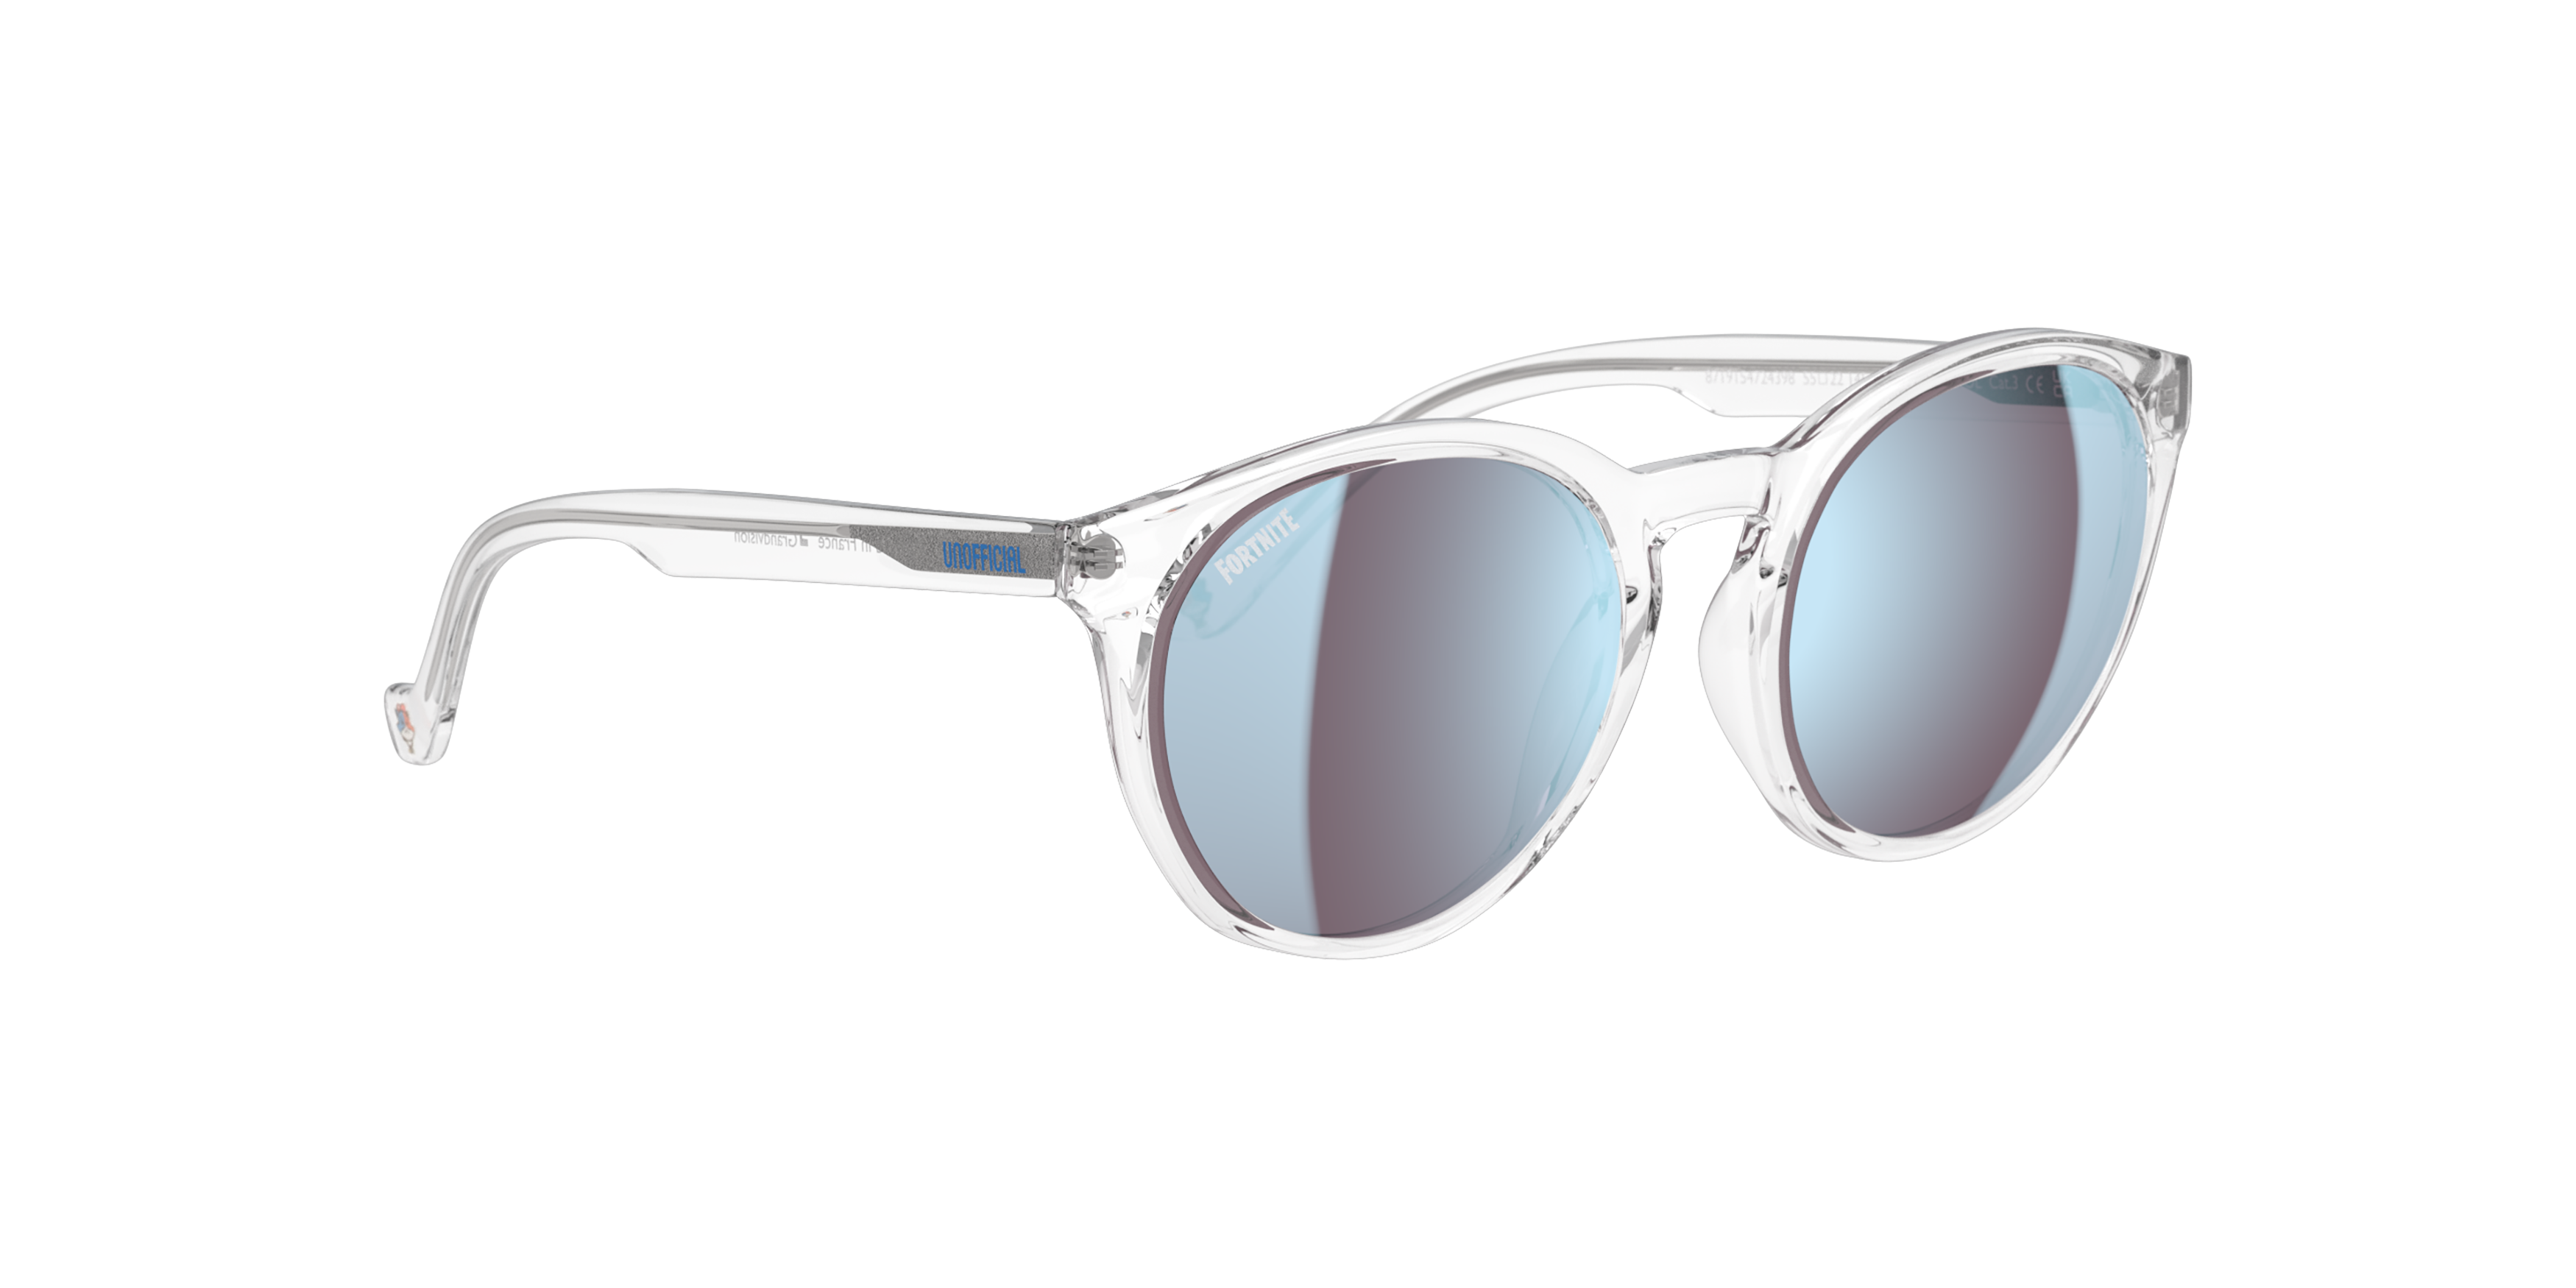 Angle_Right01 Fortnite with Unofficial UNSU0151 Sunglasses Grey / Transparent, Clear